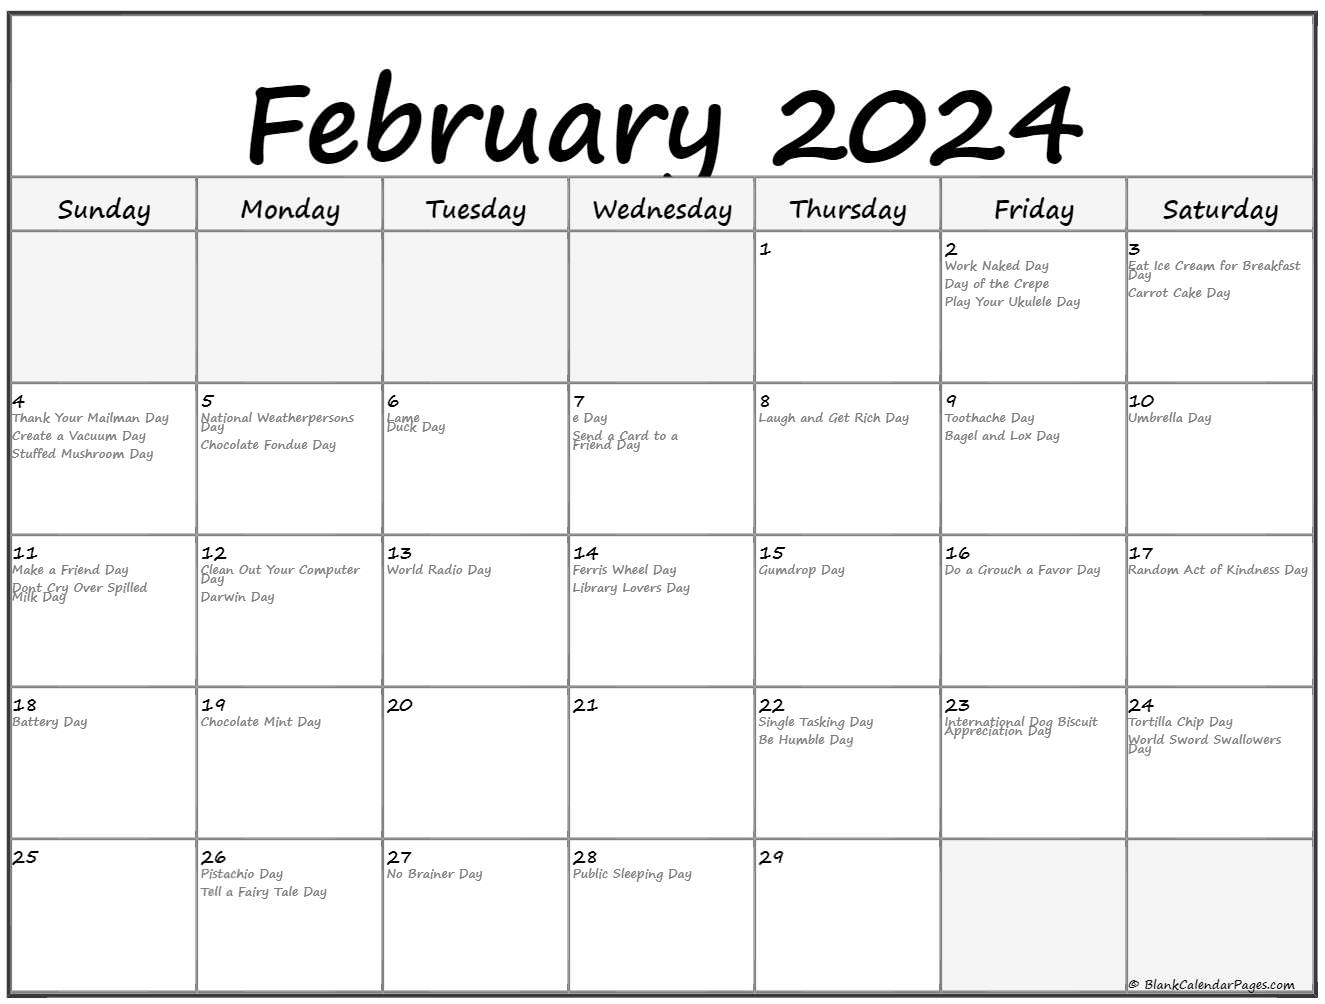 Collection of February 2020 calendars with holidays